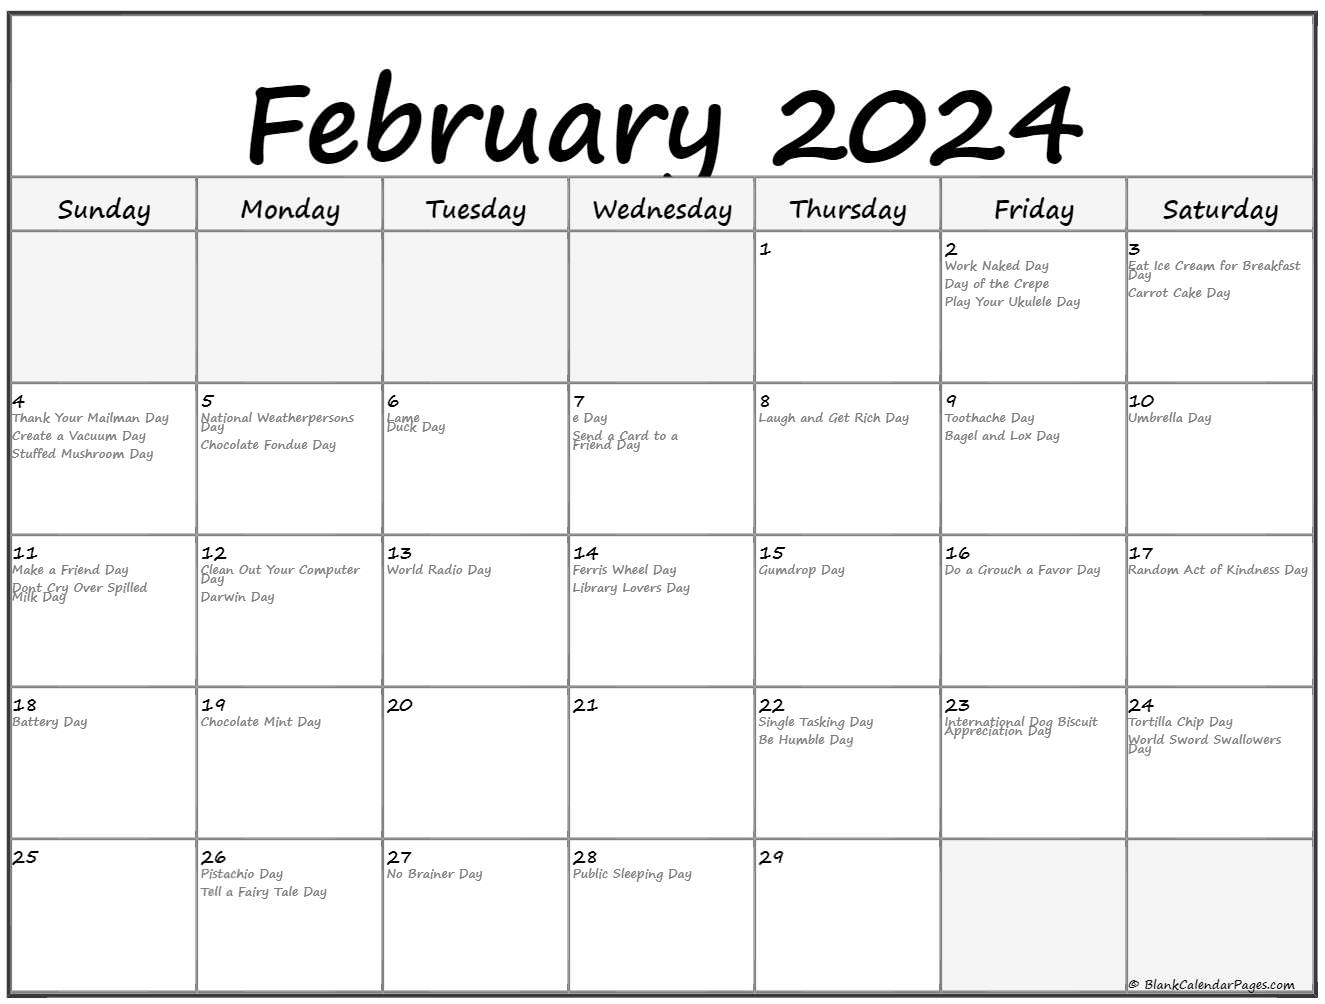 Collection of February 2020 calendars with holidays